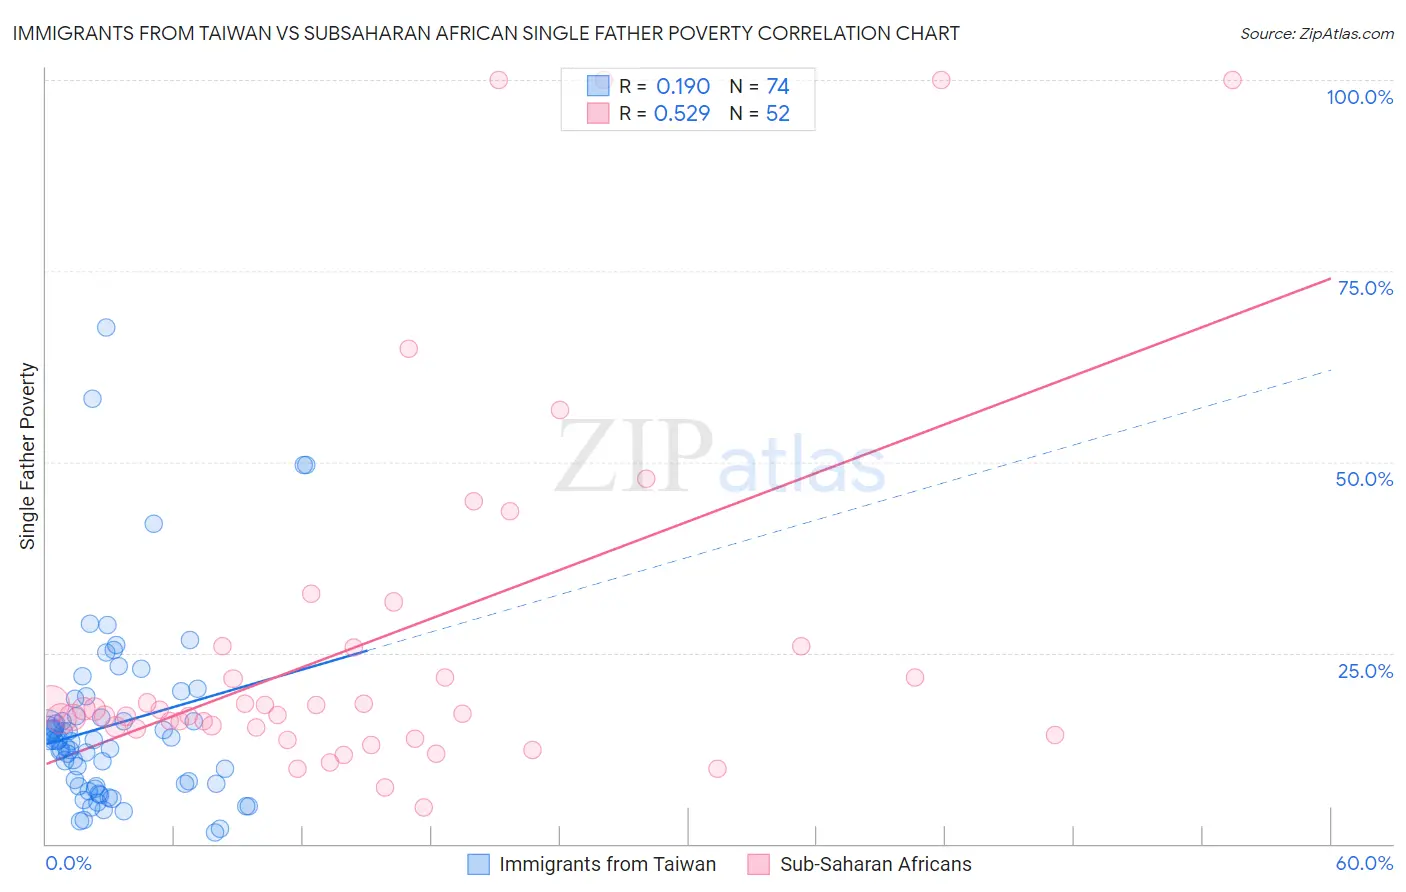 Immigrants from Taiwan vs Subsaharan African Single Father Poverty